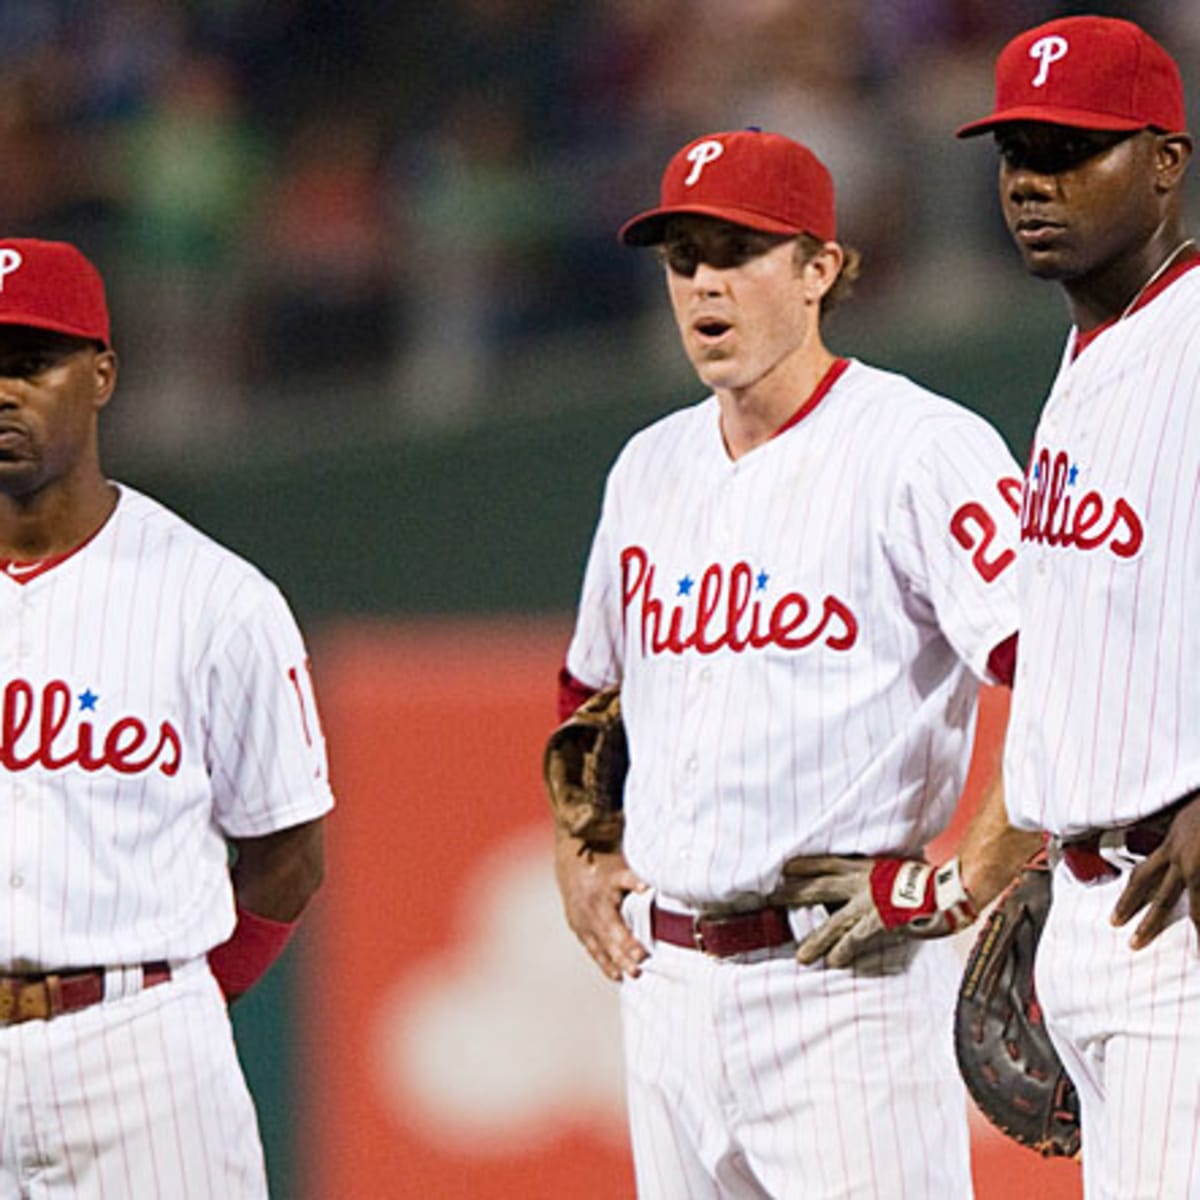 Chase Utley says Jimmy Rollins 'no doubt' belongs in the Baseball